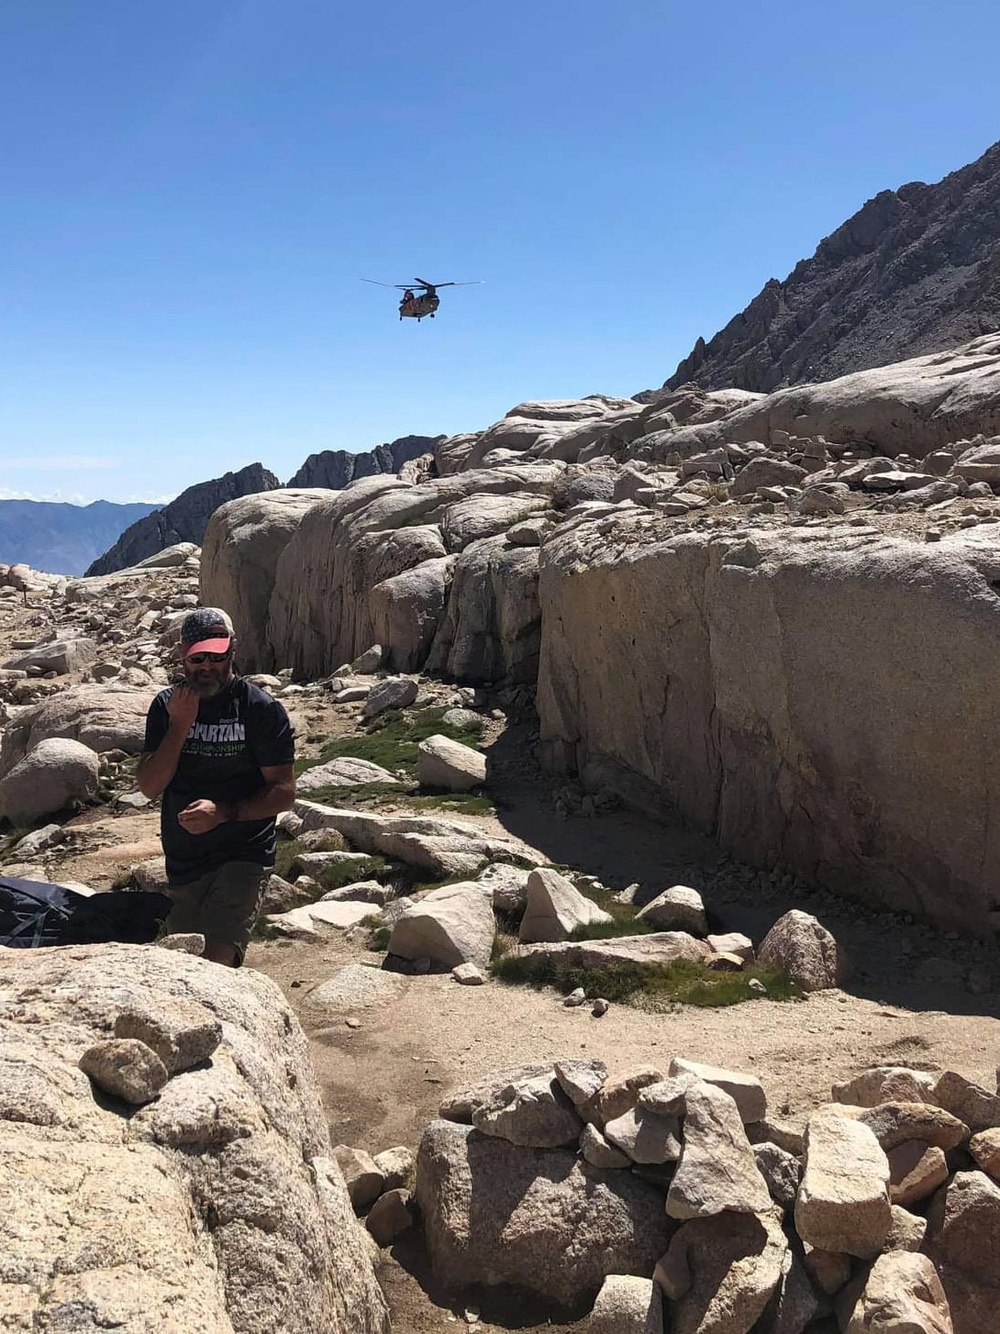 Chinook crew rescues three from Mt. Whitney